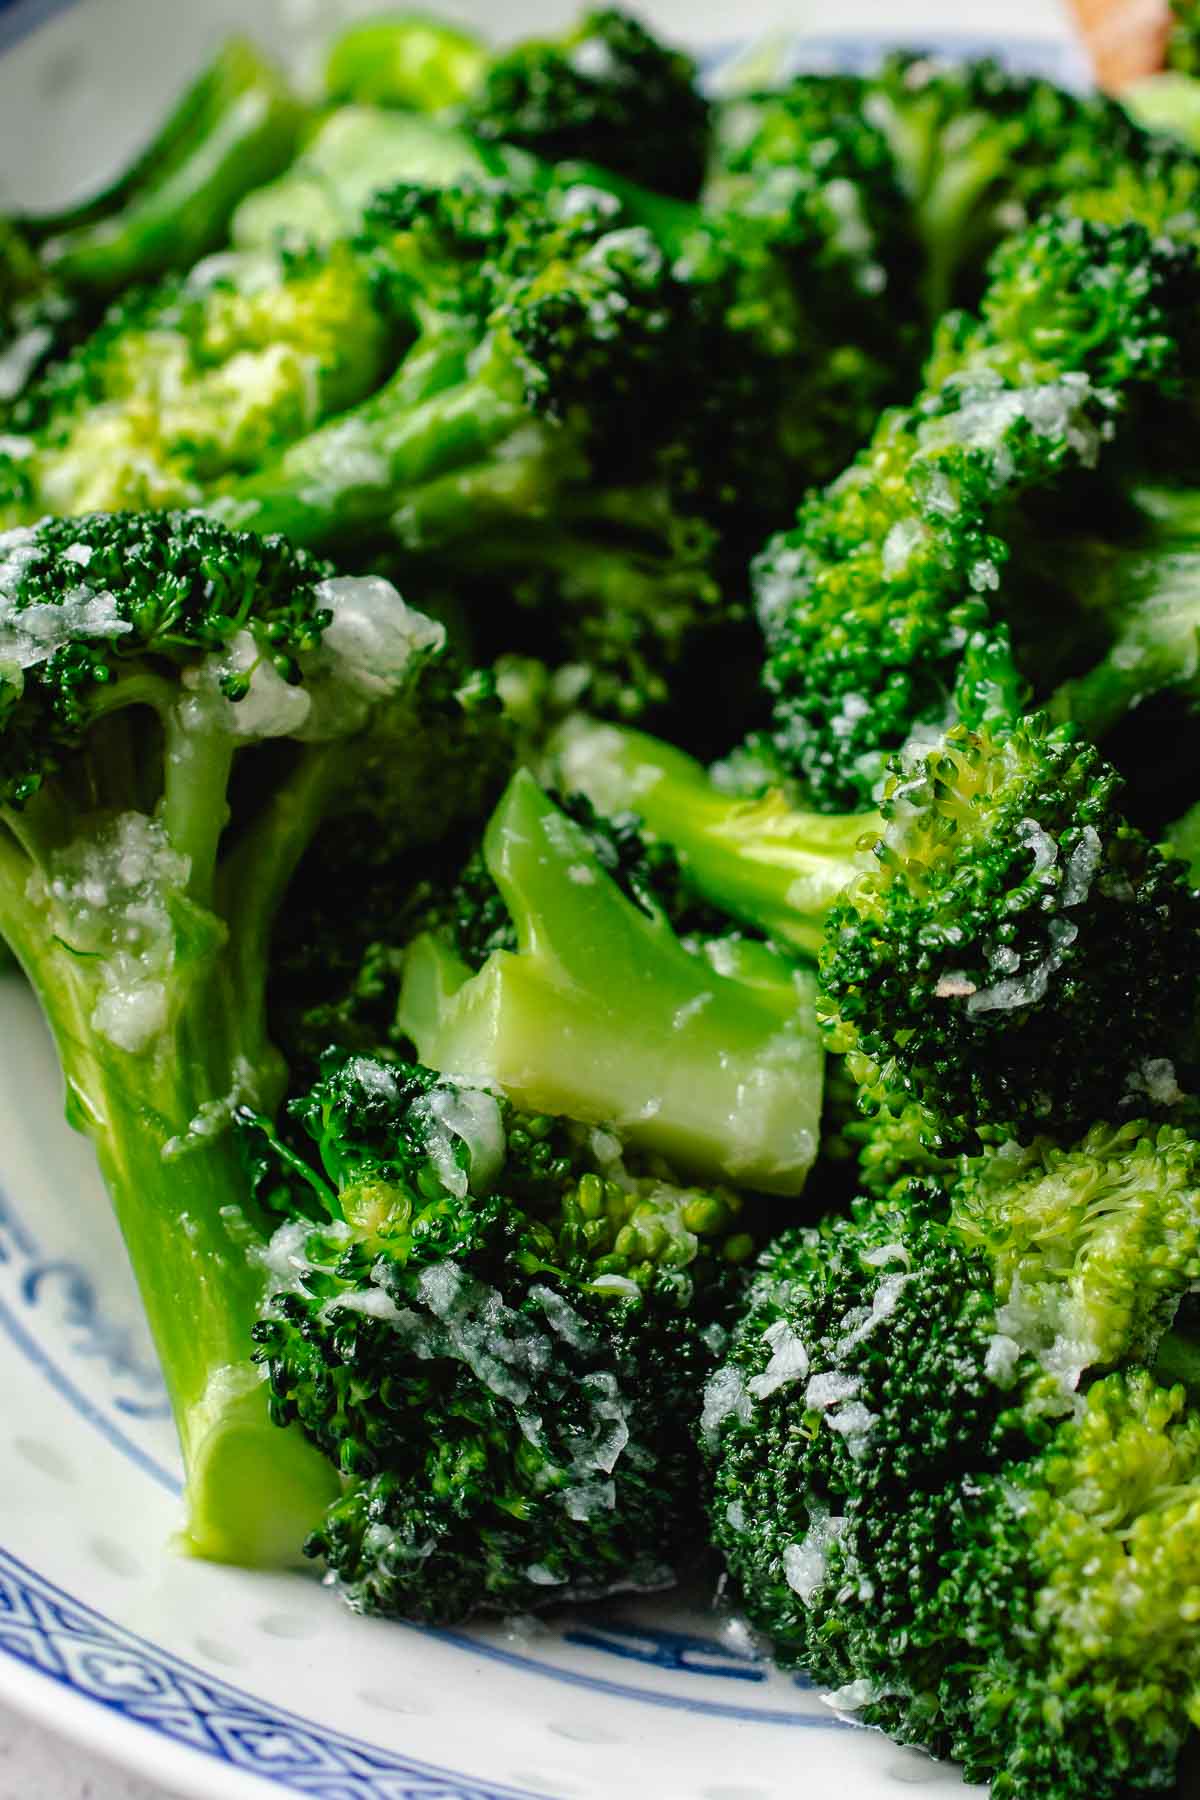 A side close shot shows perfectly cooked broccoli in garlic sauce takeout style.